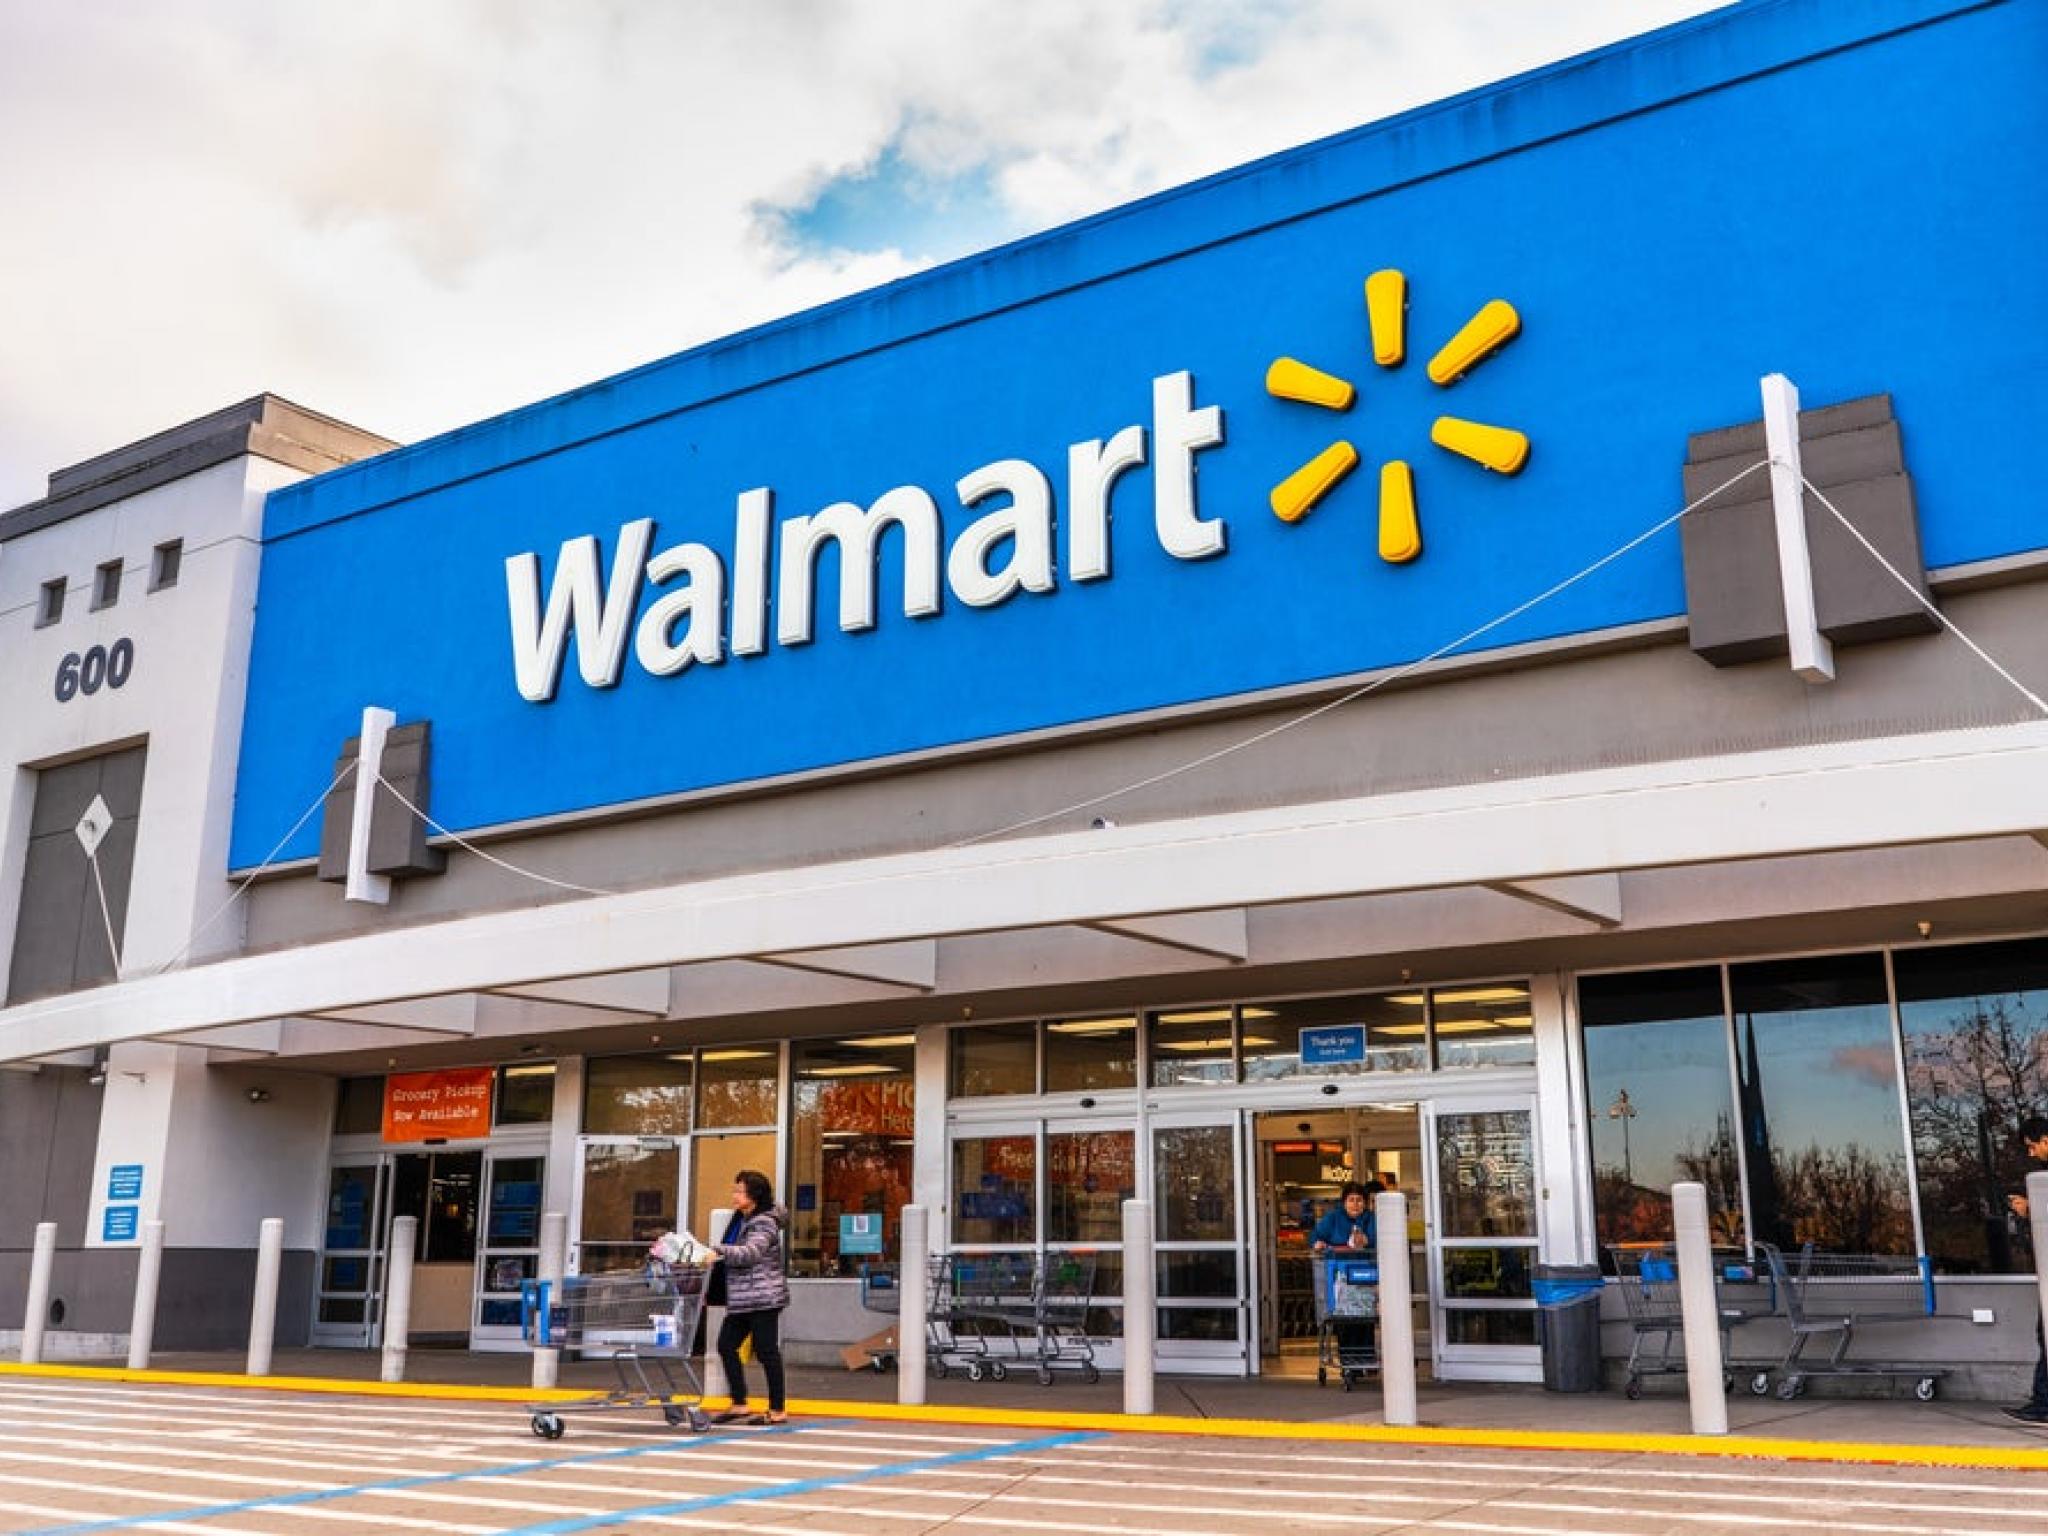  walmart-considers-200m-bet-on-self-driving-forklifts-to-boost-automation 